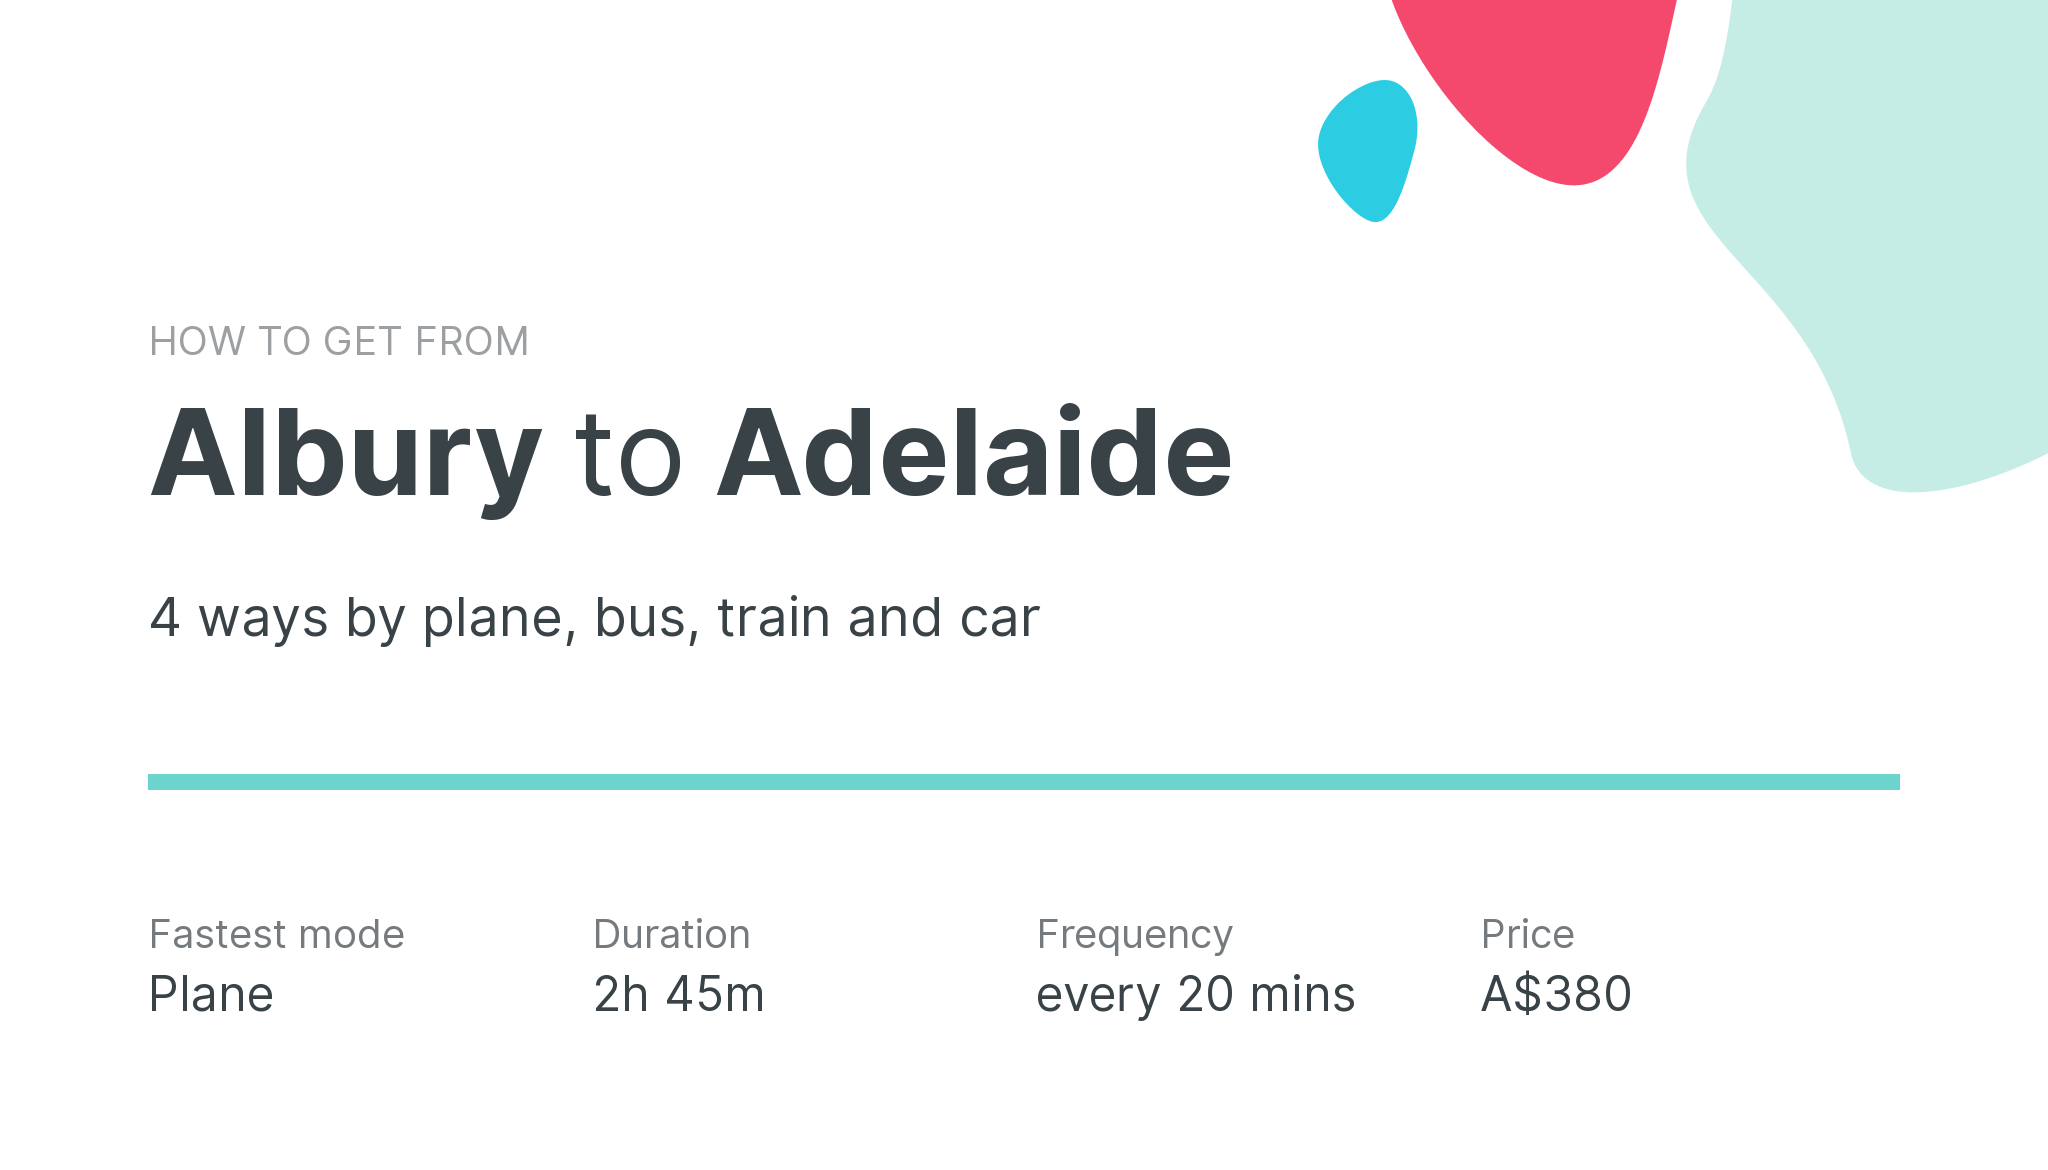 How do I get from Albury to Adelaide